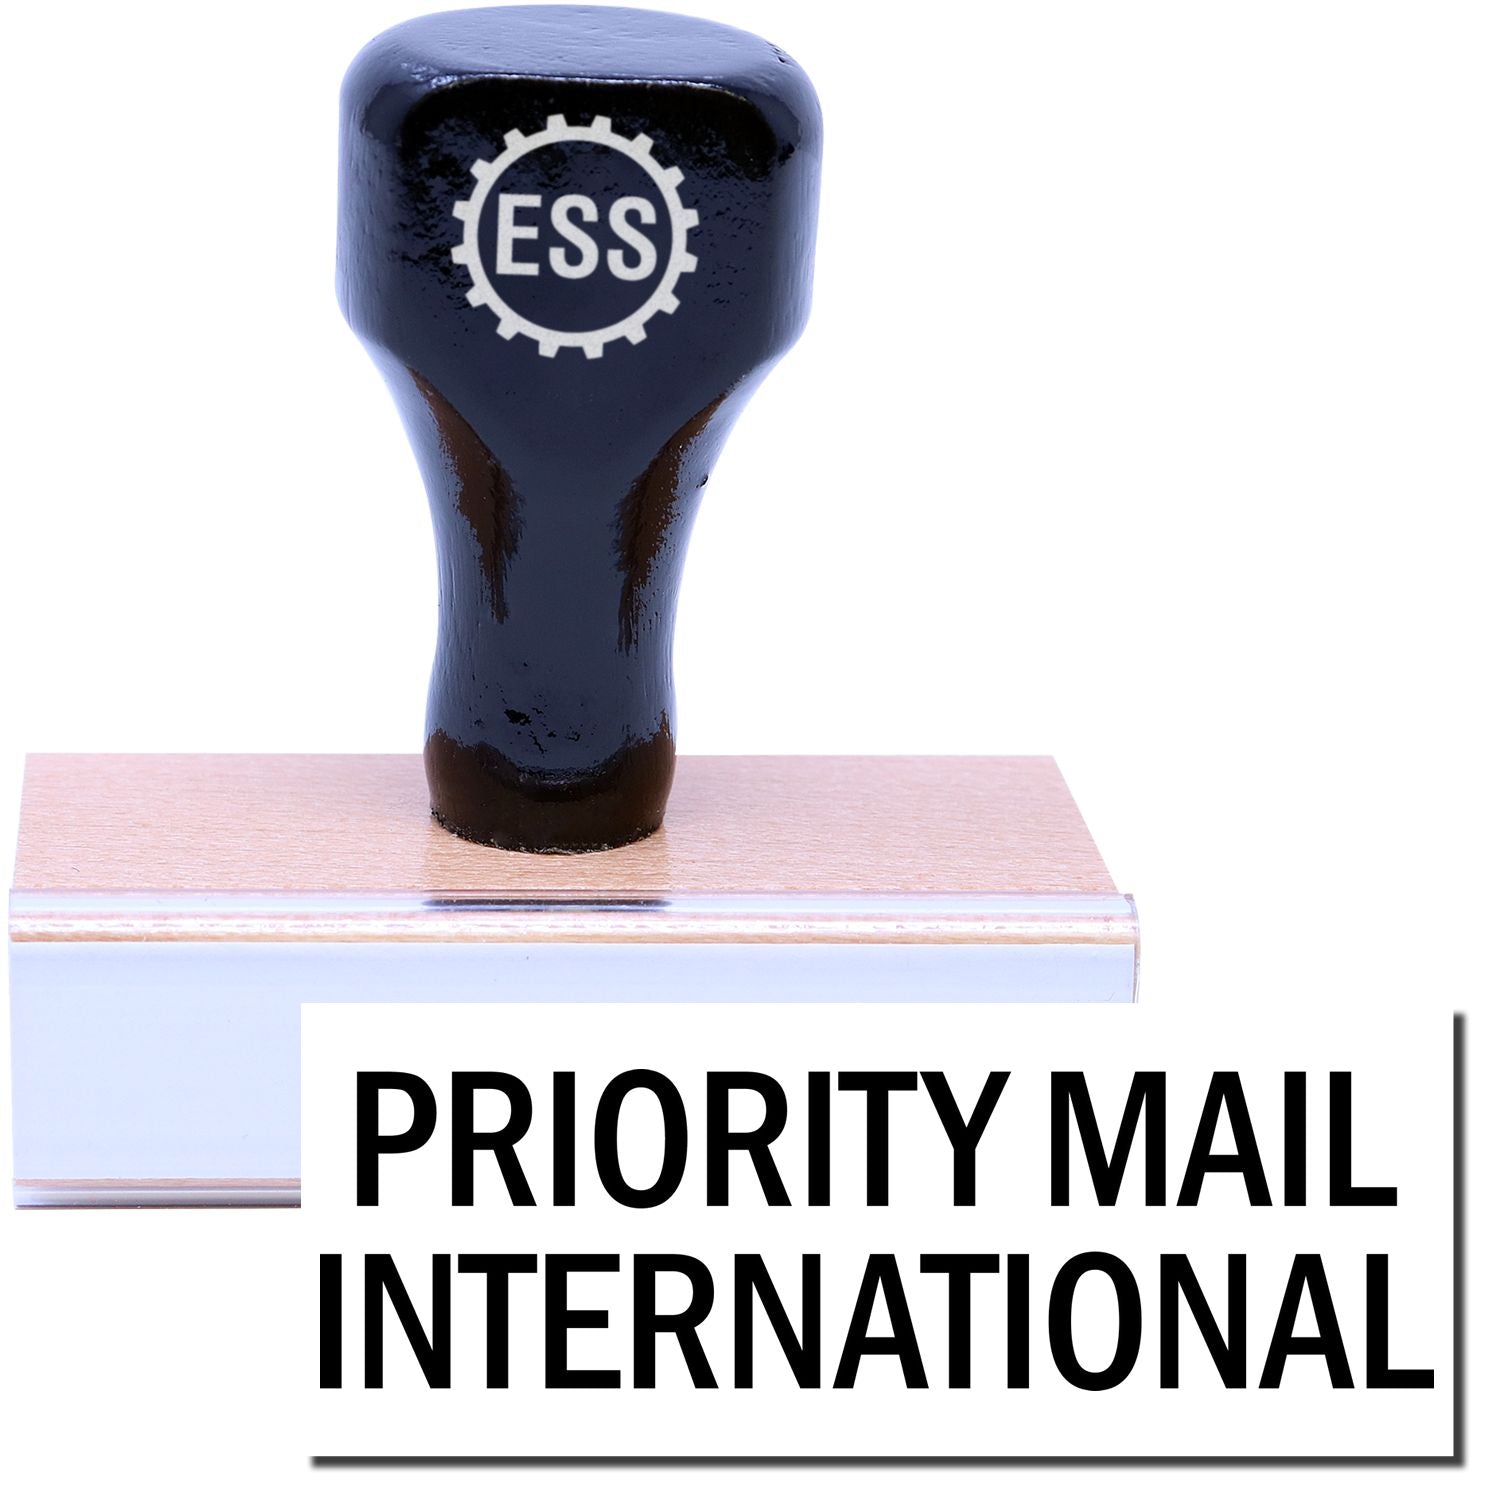 A stock office rubber stamp with a stamped image showing how the text "PRIORITY MAIL INTERNATIONAL" in a large font is displayed after stamping.